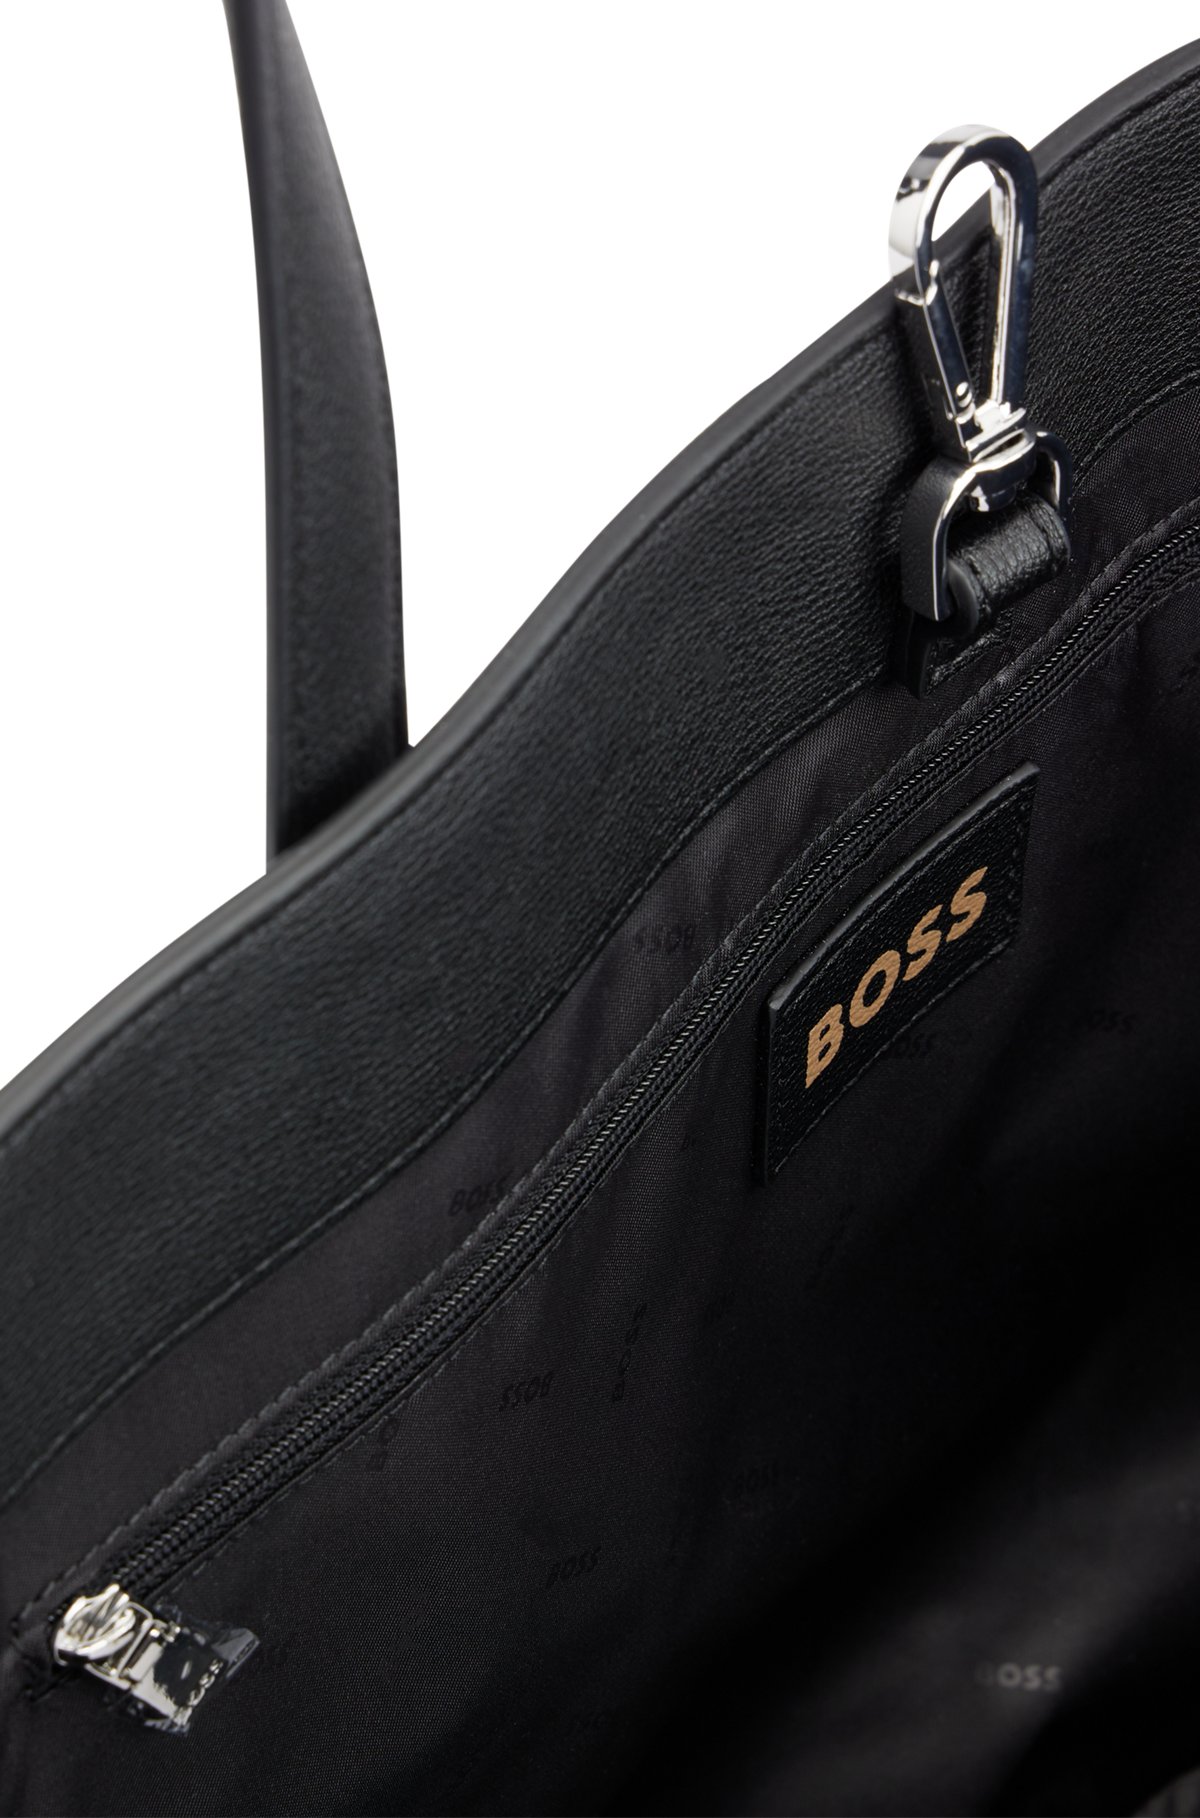 Tote bag in faux leather with debossed logo, Black